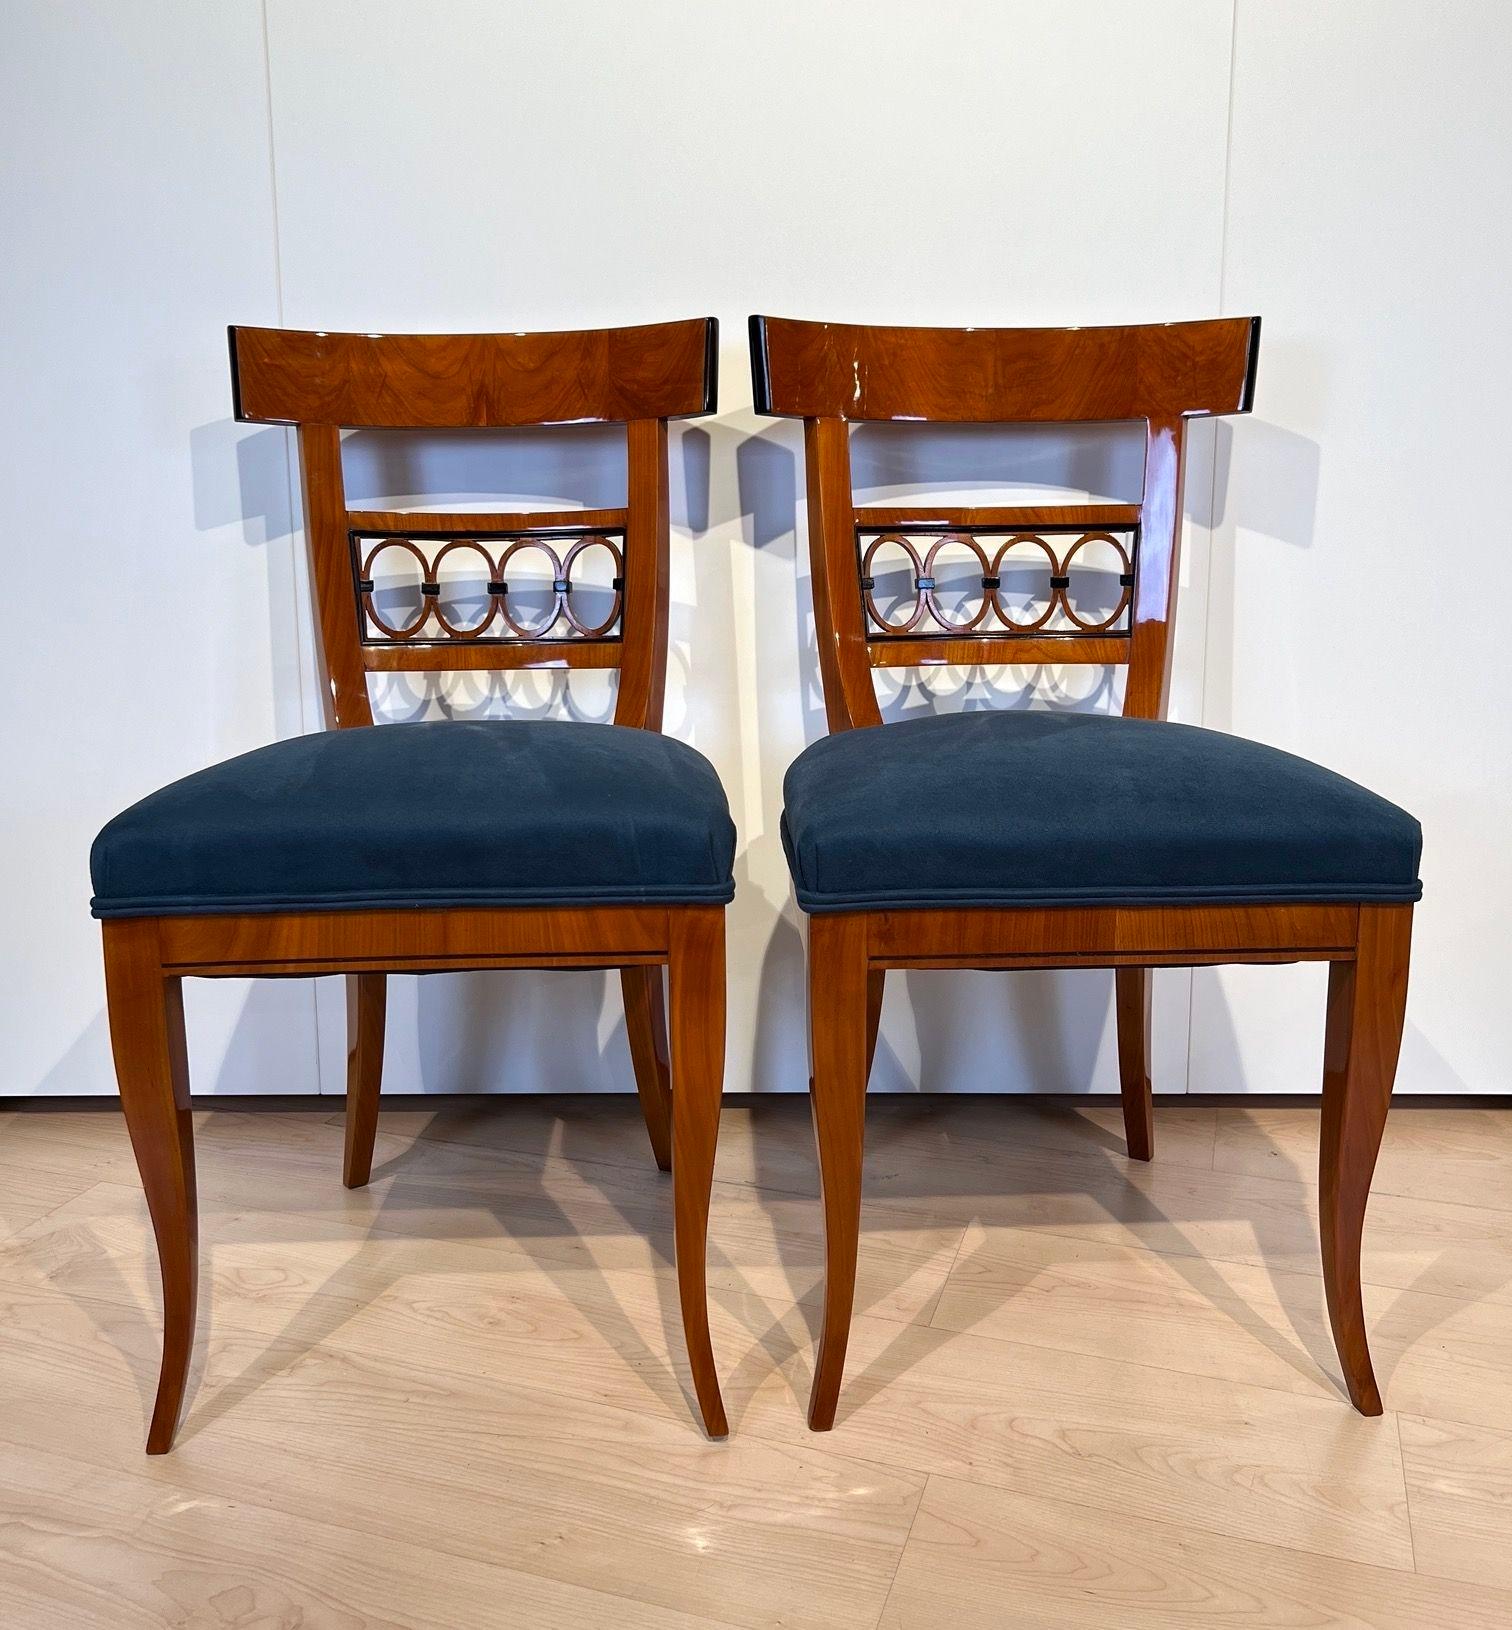 Pair of very fine, high-quality original Biedermeier chairs from southern Germany around 1840.
Cherry wood veneered and solid, partly ebonized. Ebony band inlay on the frame. Back decoration with ovals.
Newly upholstered and with blue suede fabric